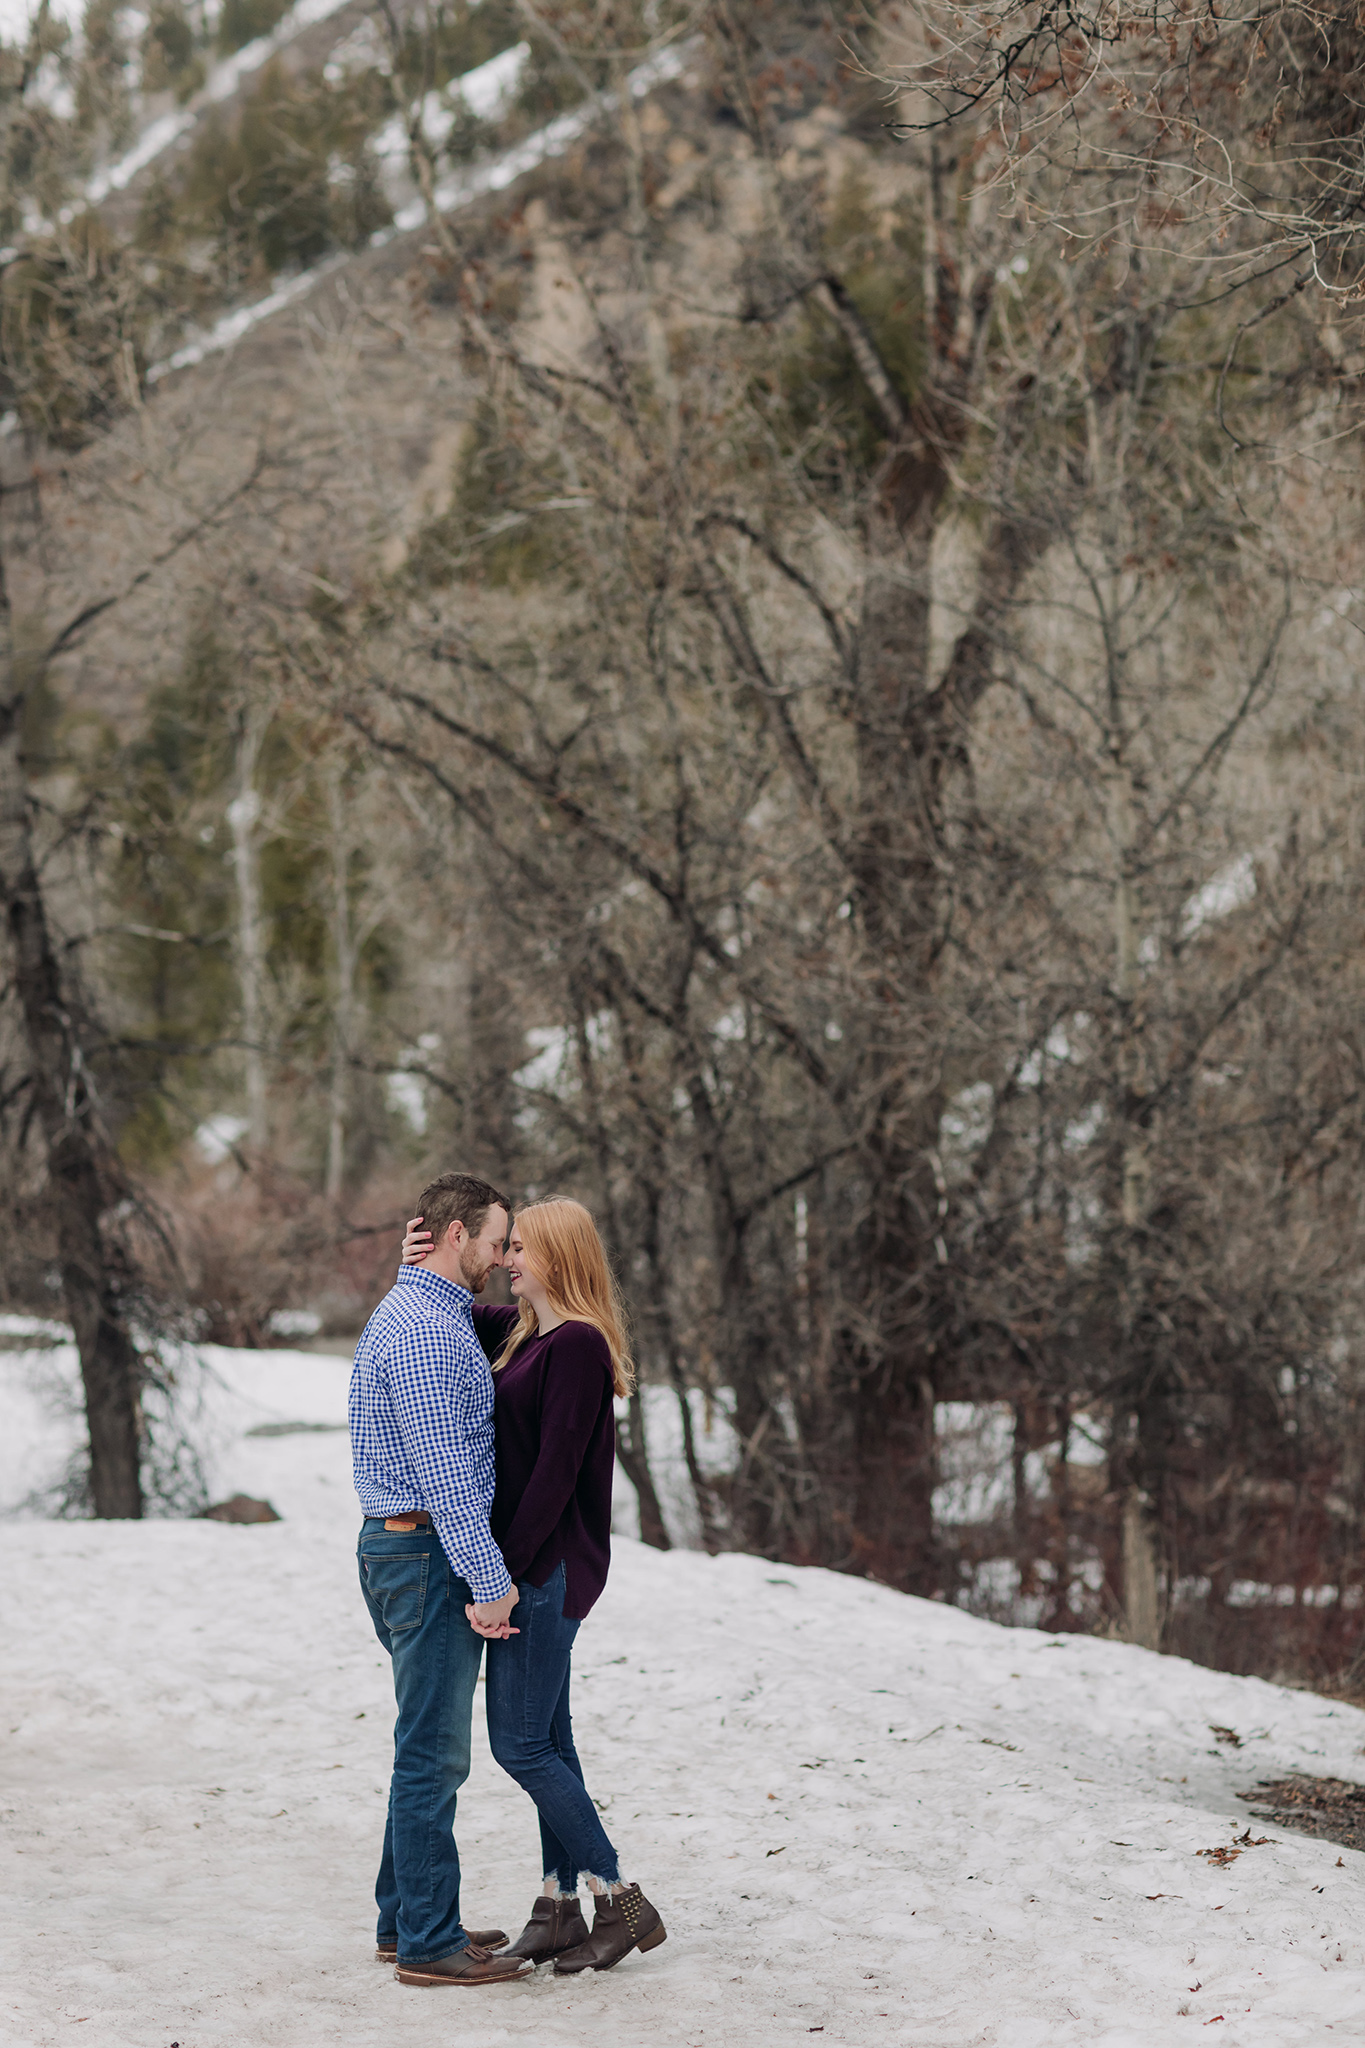 Utah Mountain Couples session in the SPring by Travelling Elopement Photographer ENV Photography